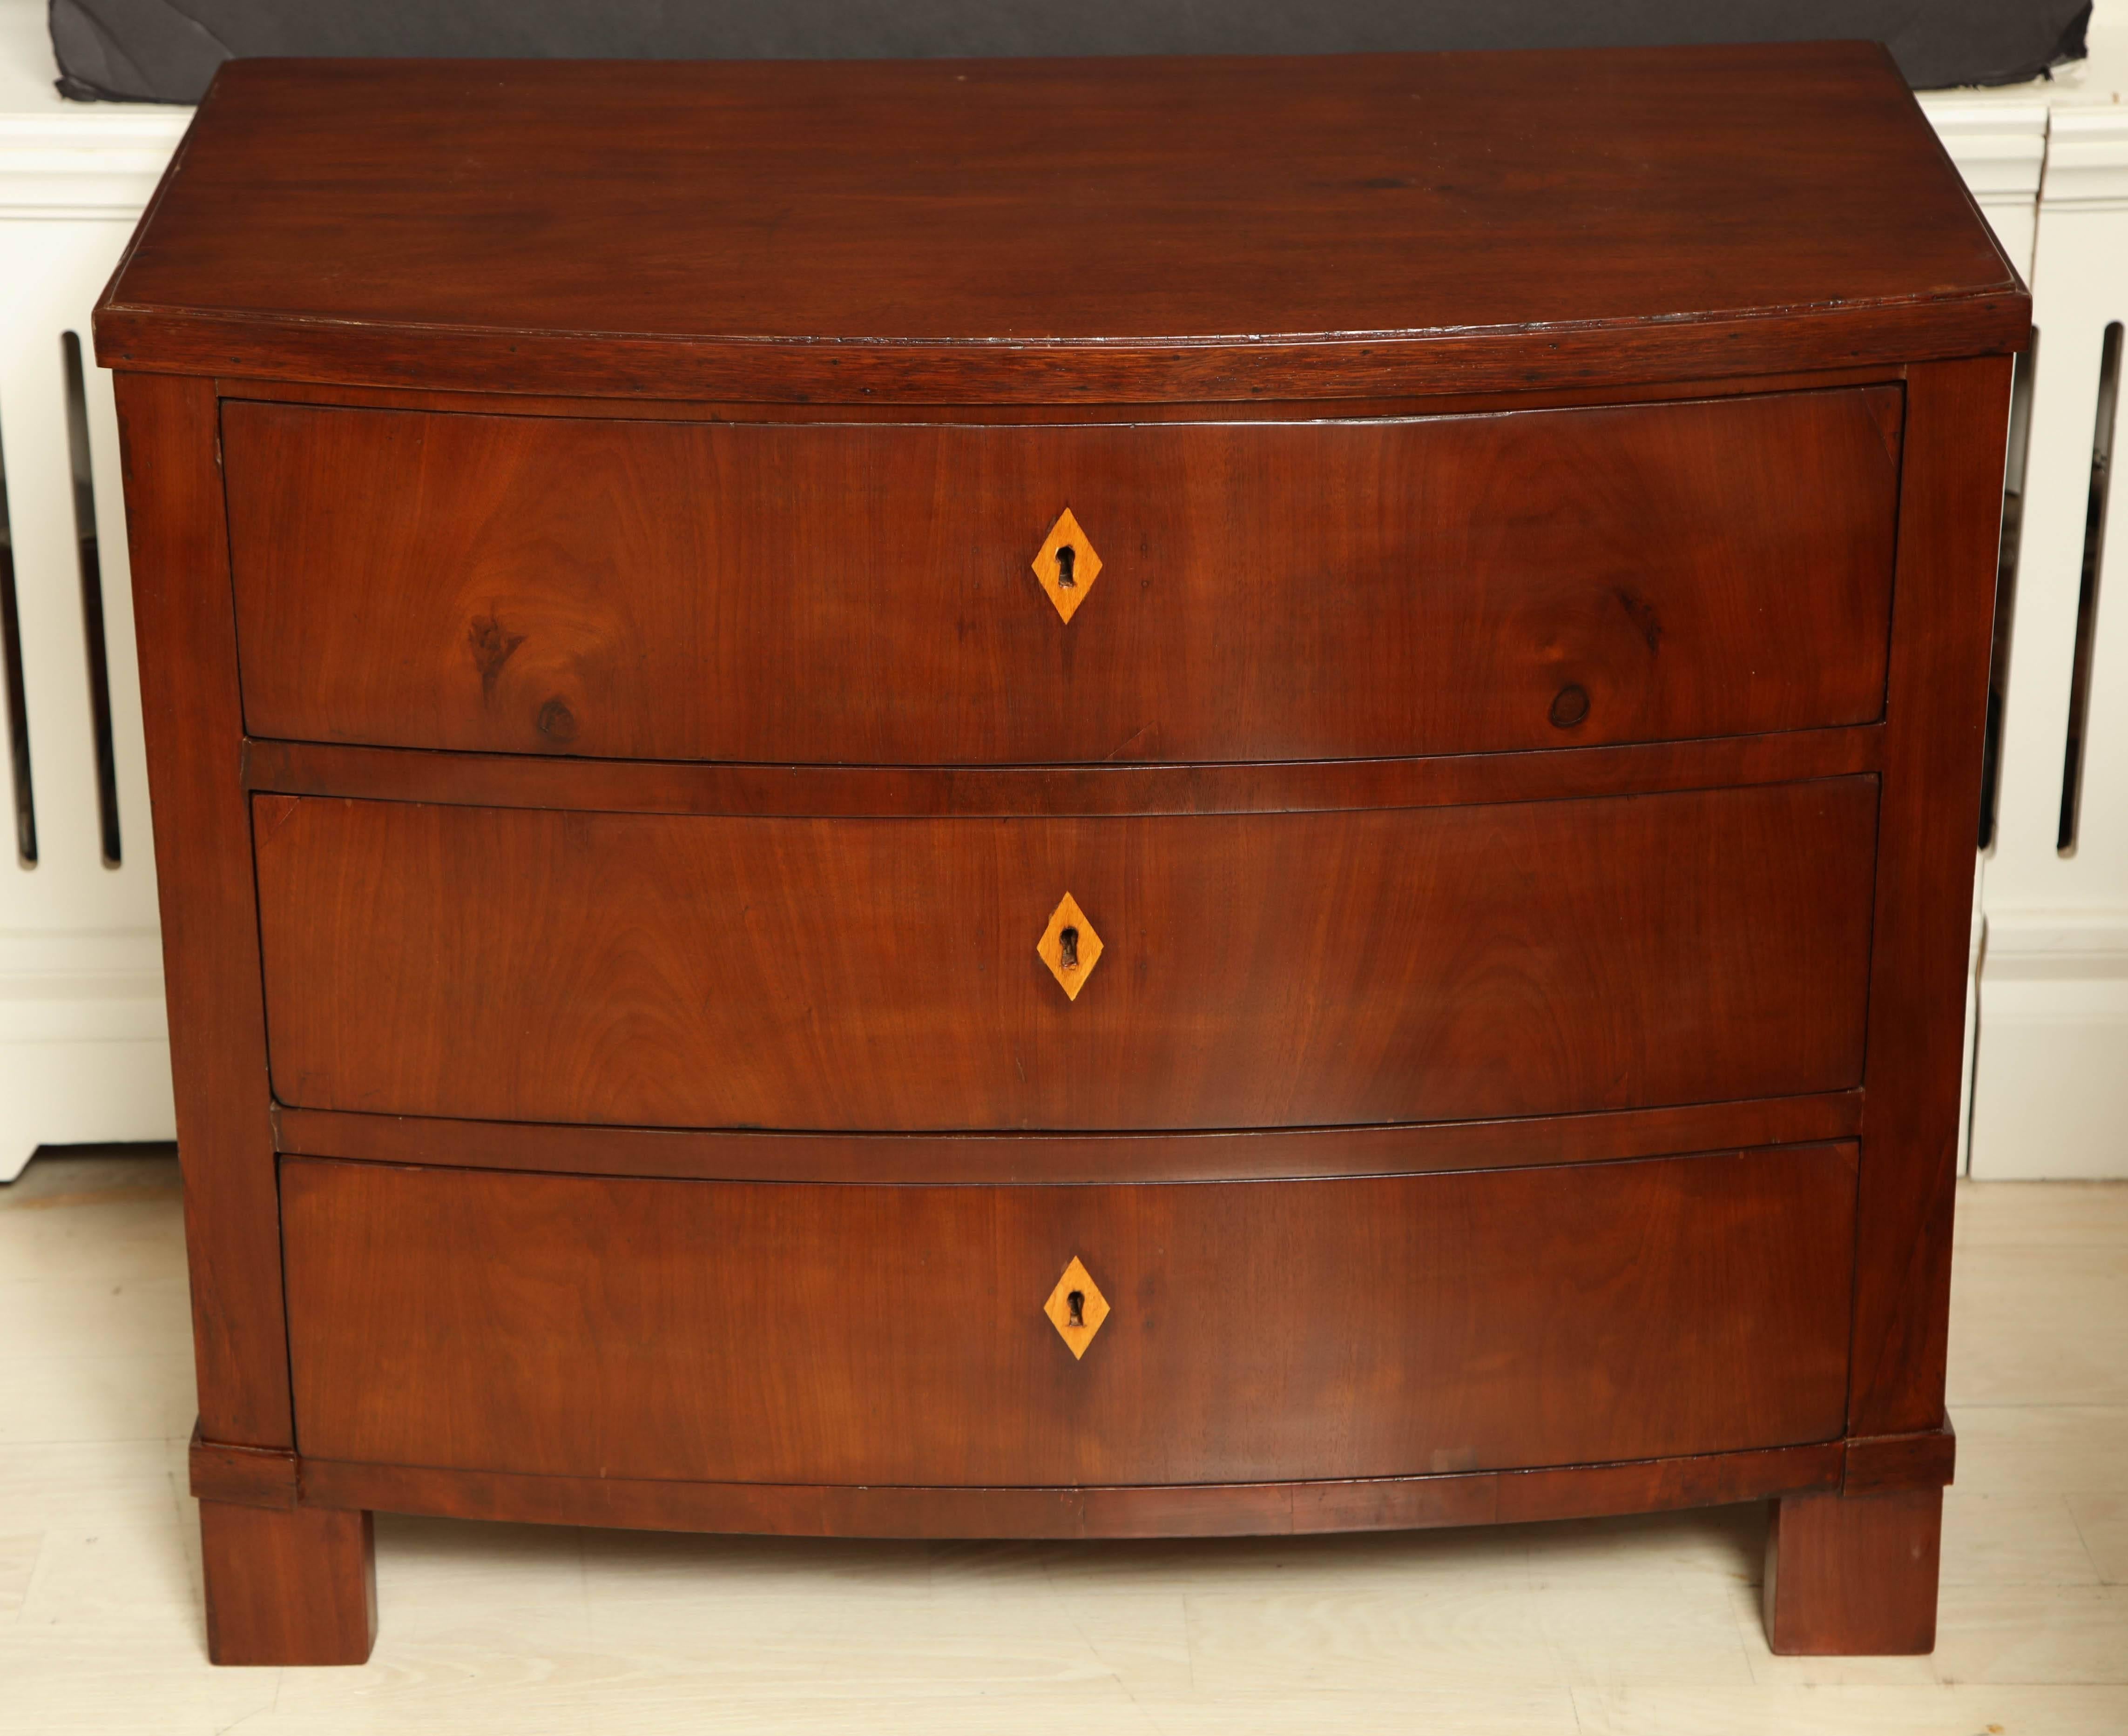 Three-drawer bow front mahogany Biedermeier style commode with inlaid satinwood escutcheons, Italy, circa 1830.